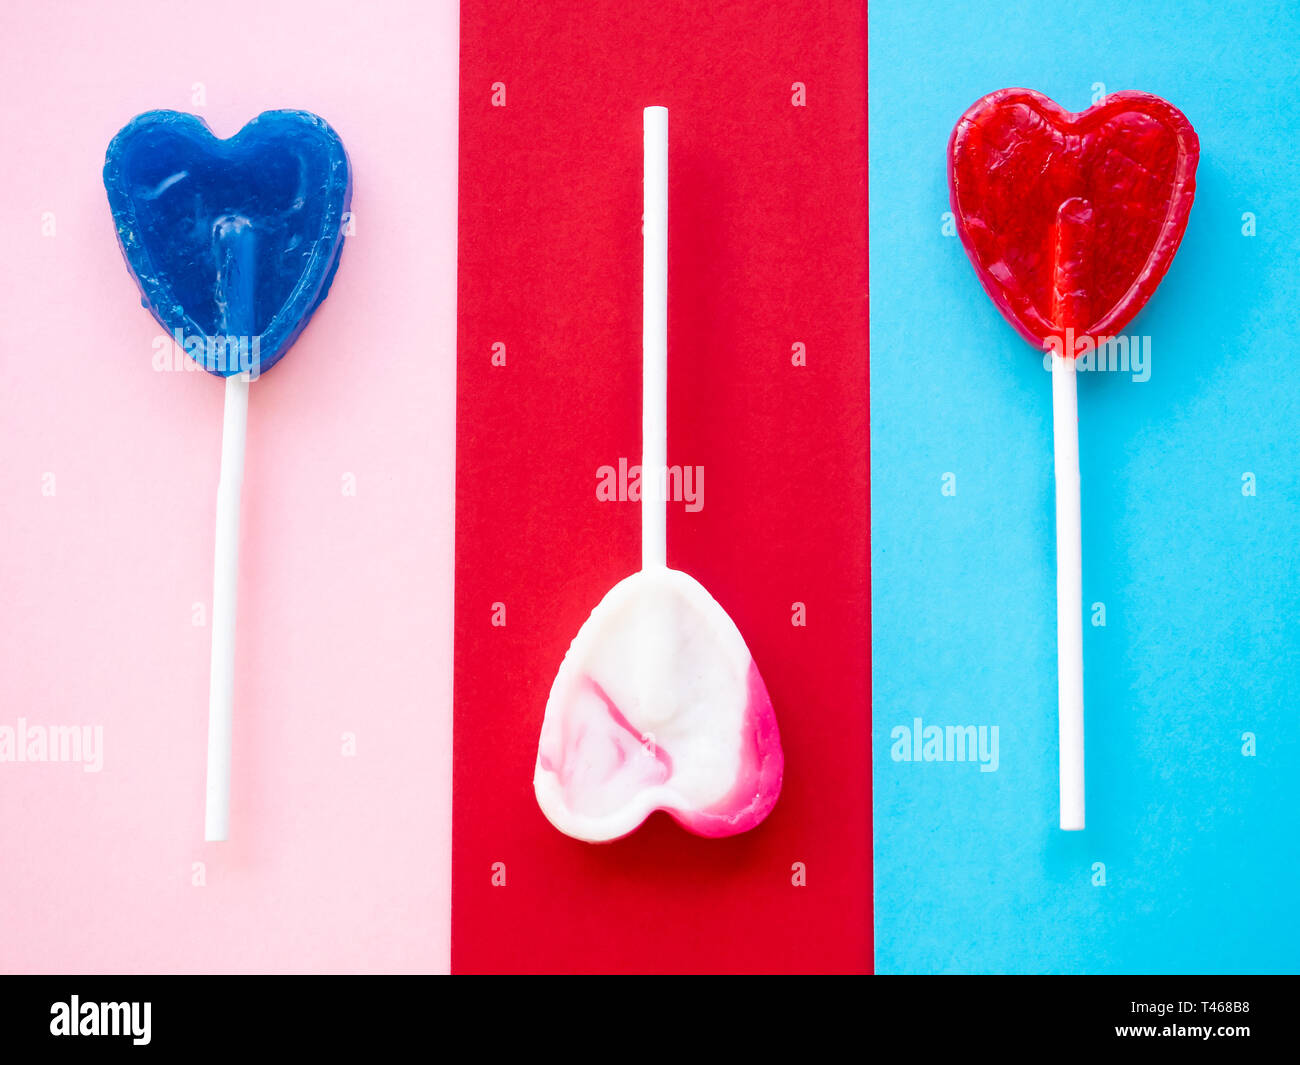 Several lollipops on a red, pink and blue background Stock Photo